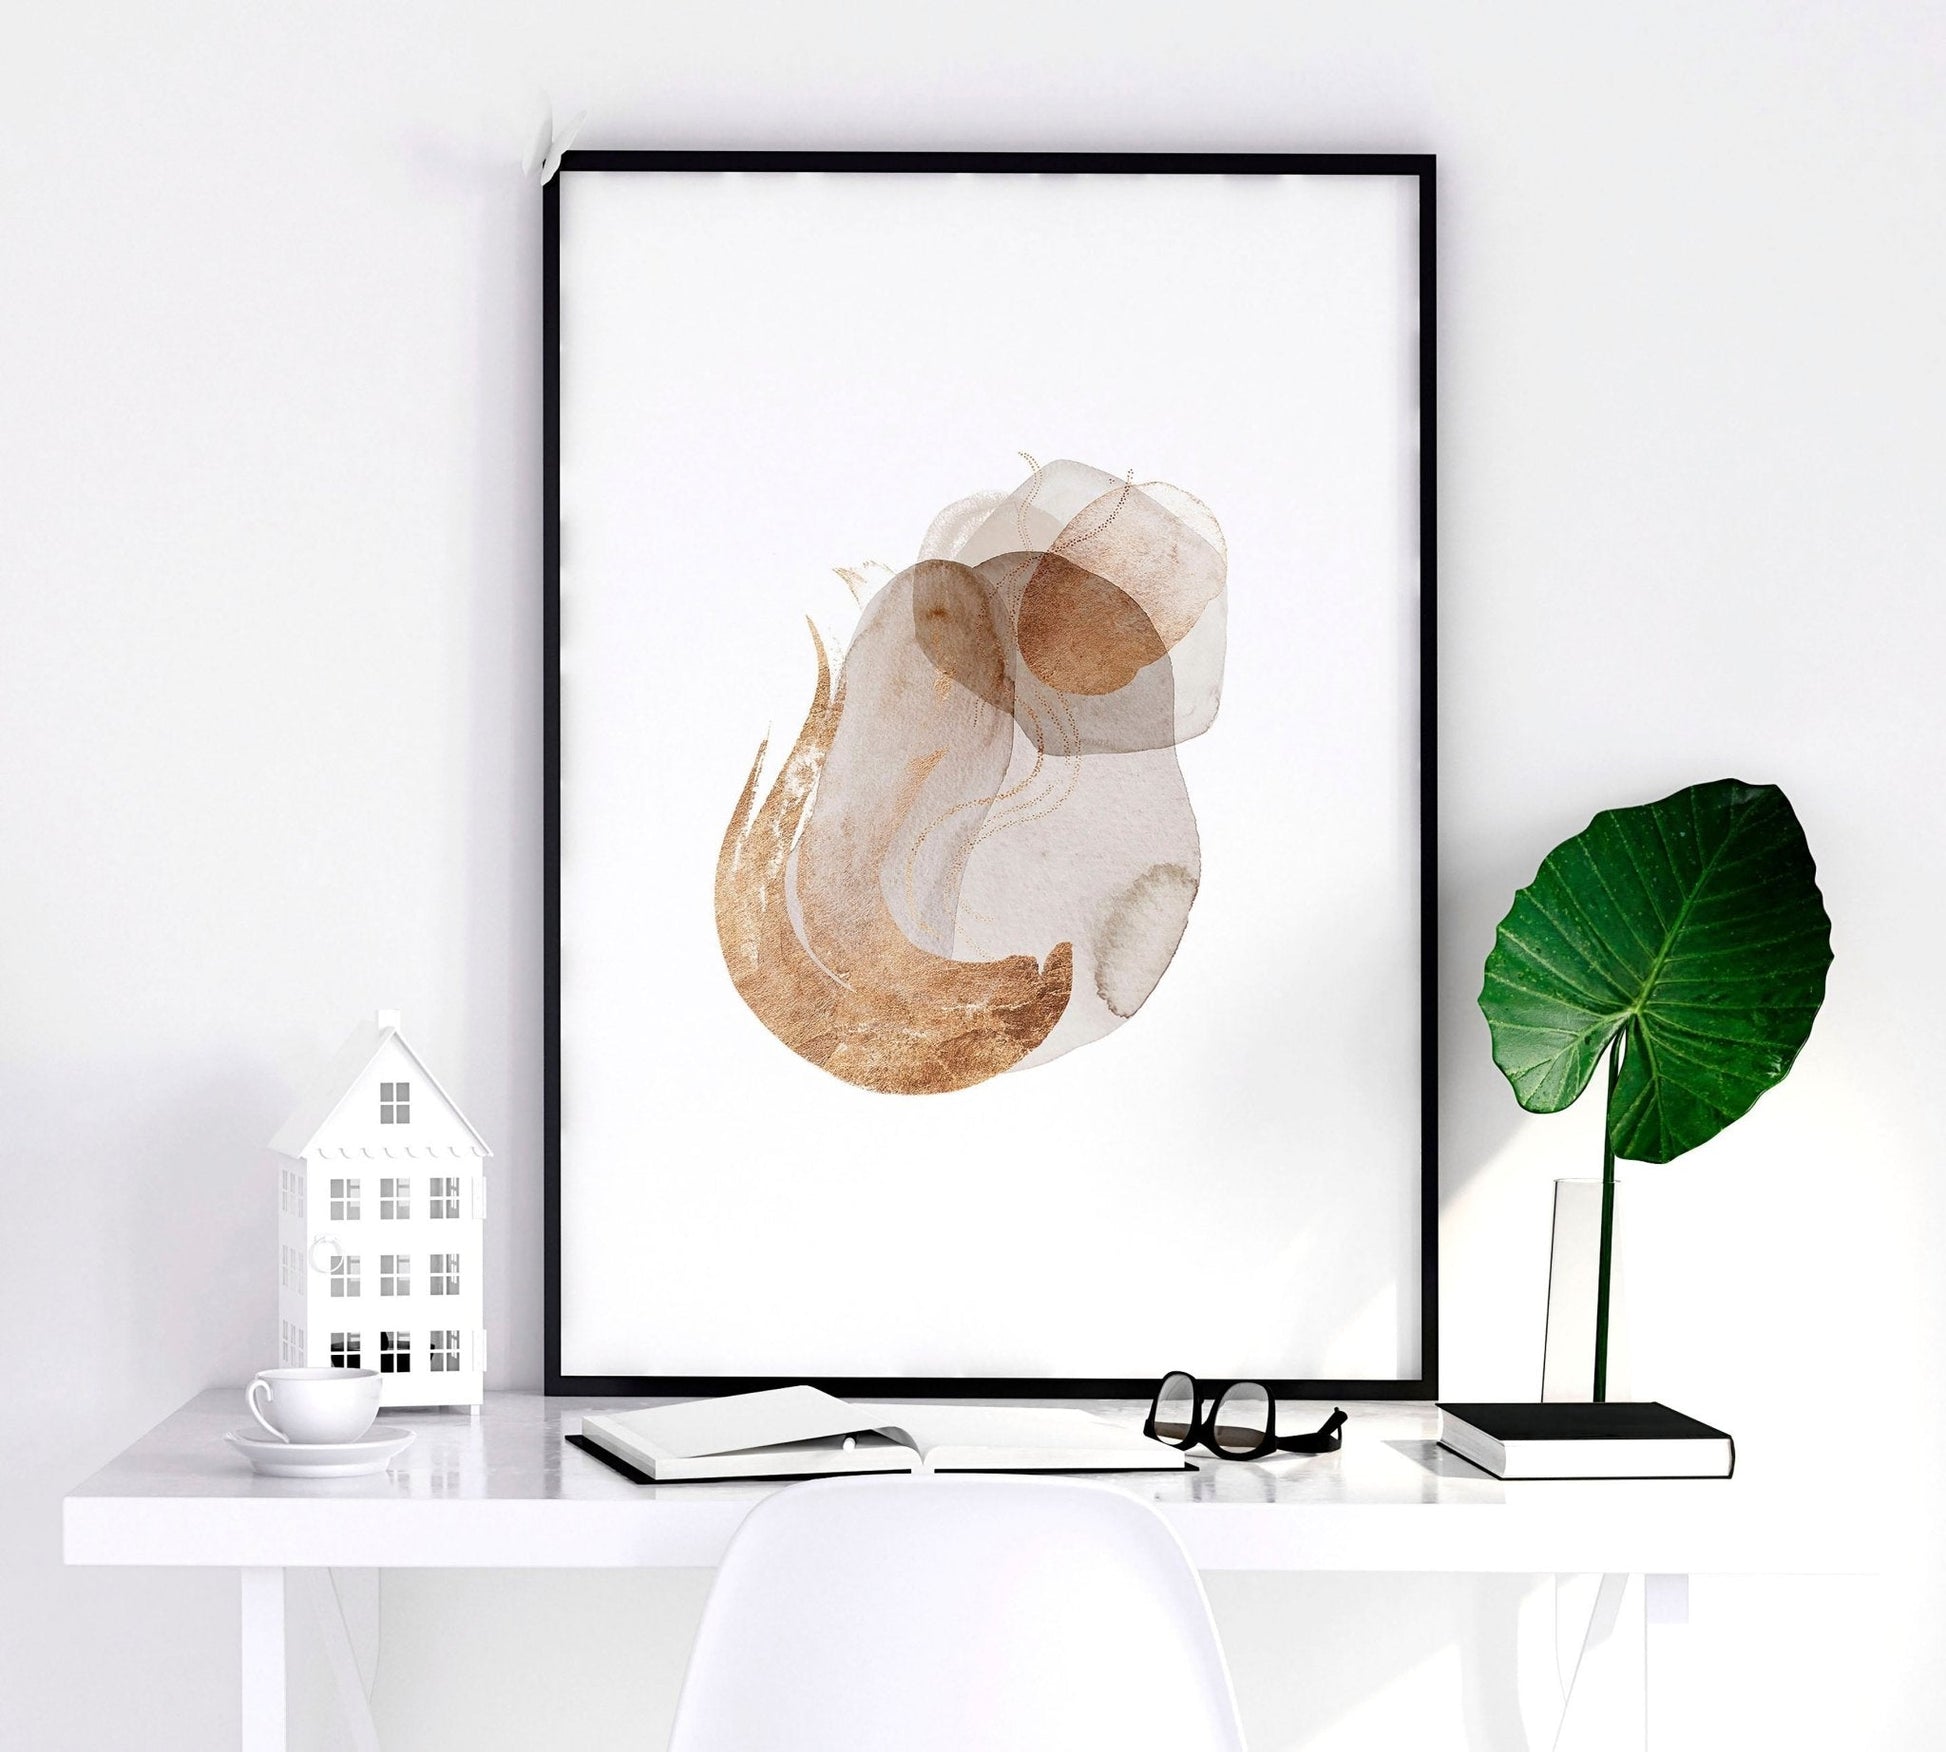 Mid century modern accent wall - Set of 3 abstract framed wall art prints - About Wall Art